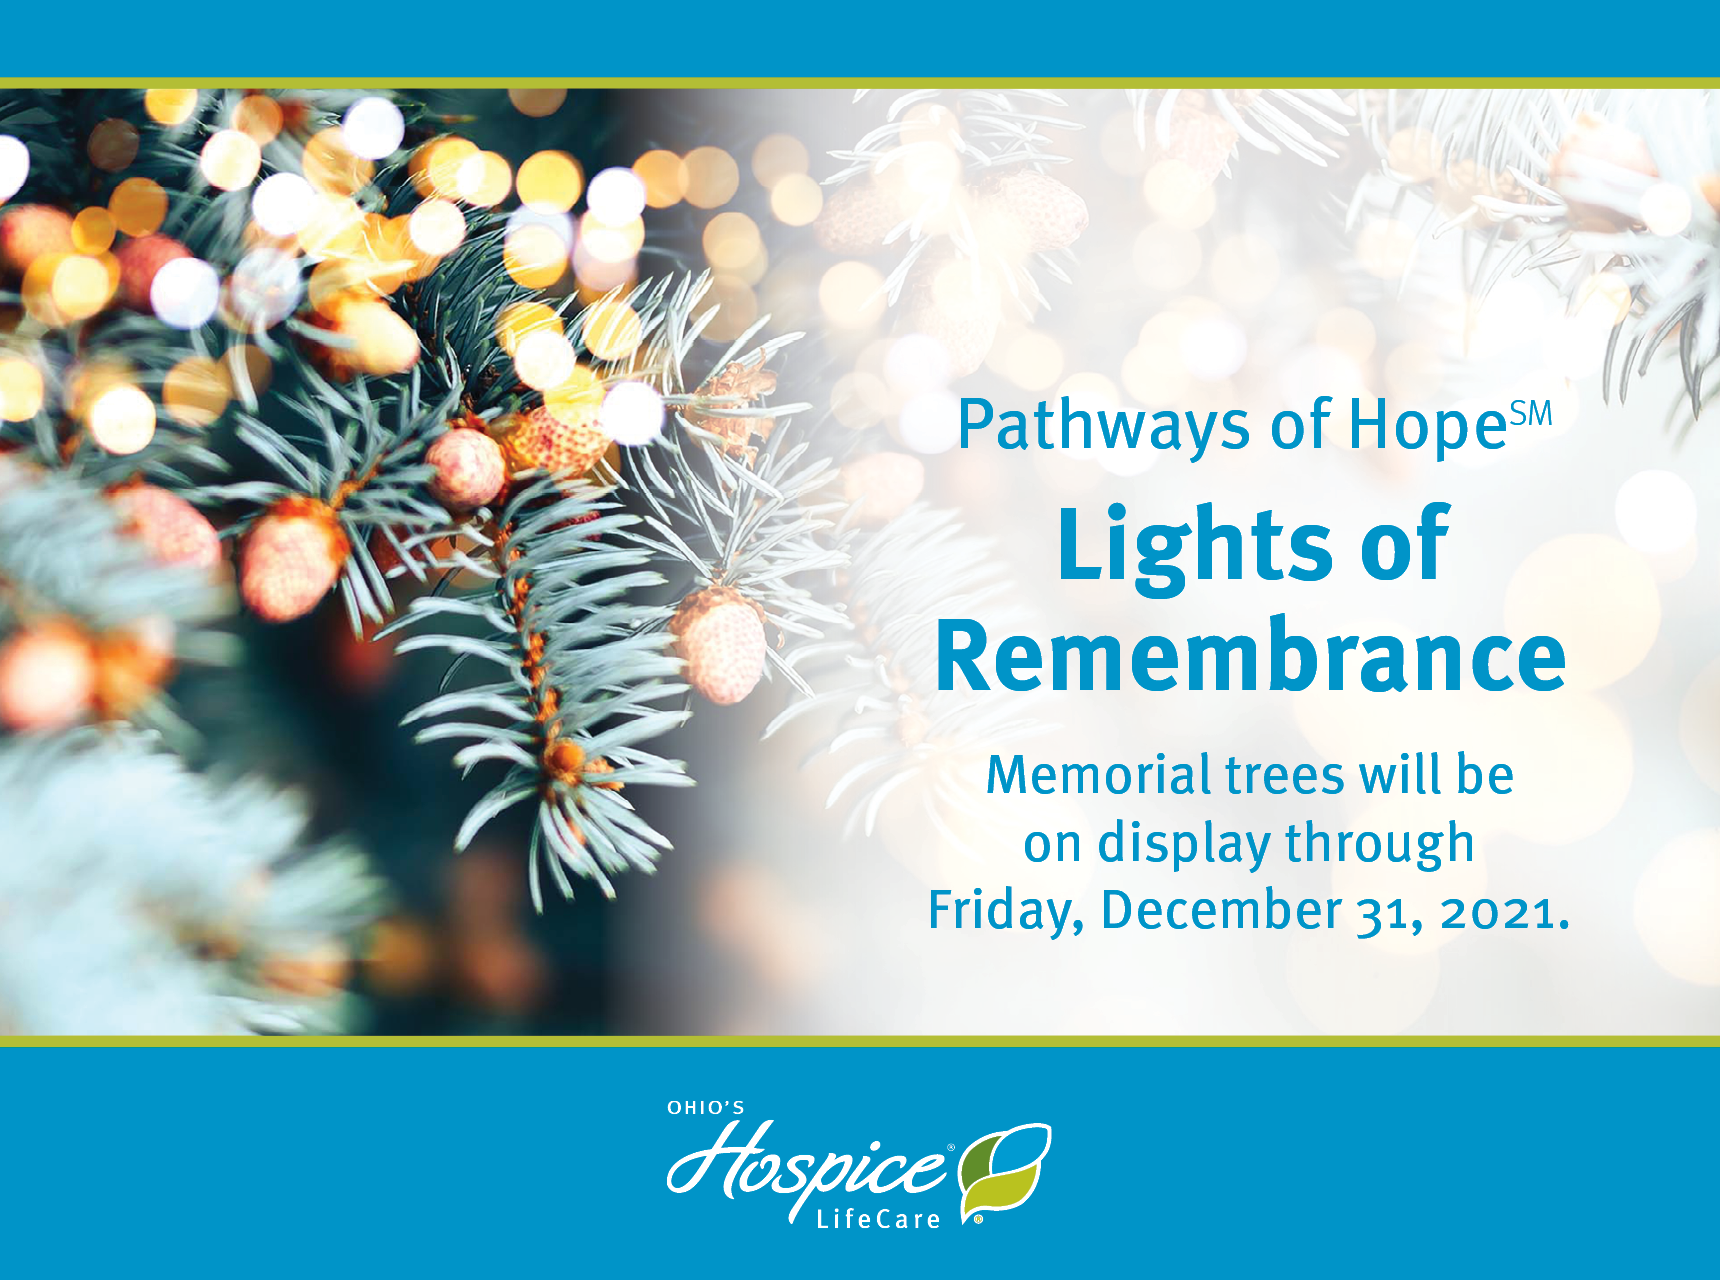 Pathways of Hope Lights of Remembrance: Memorial trees will be on display through December 31, 2021.